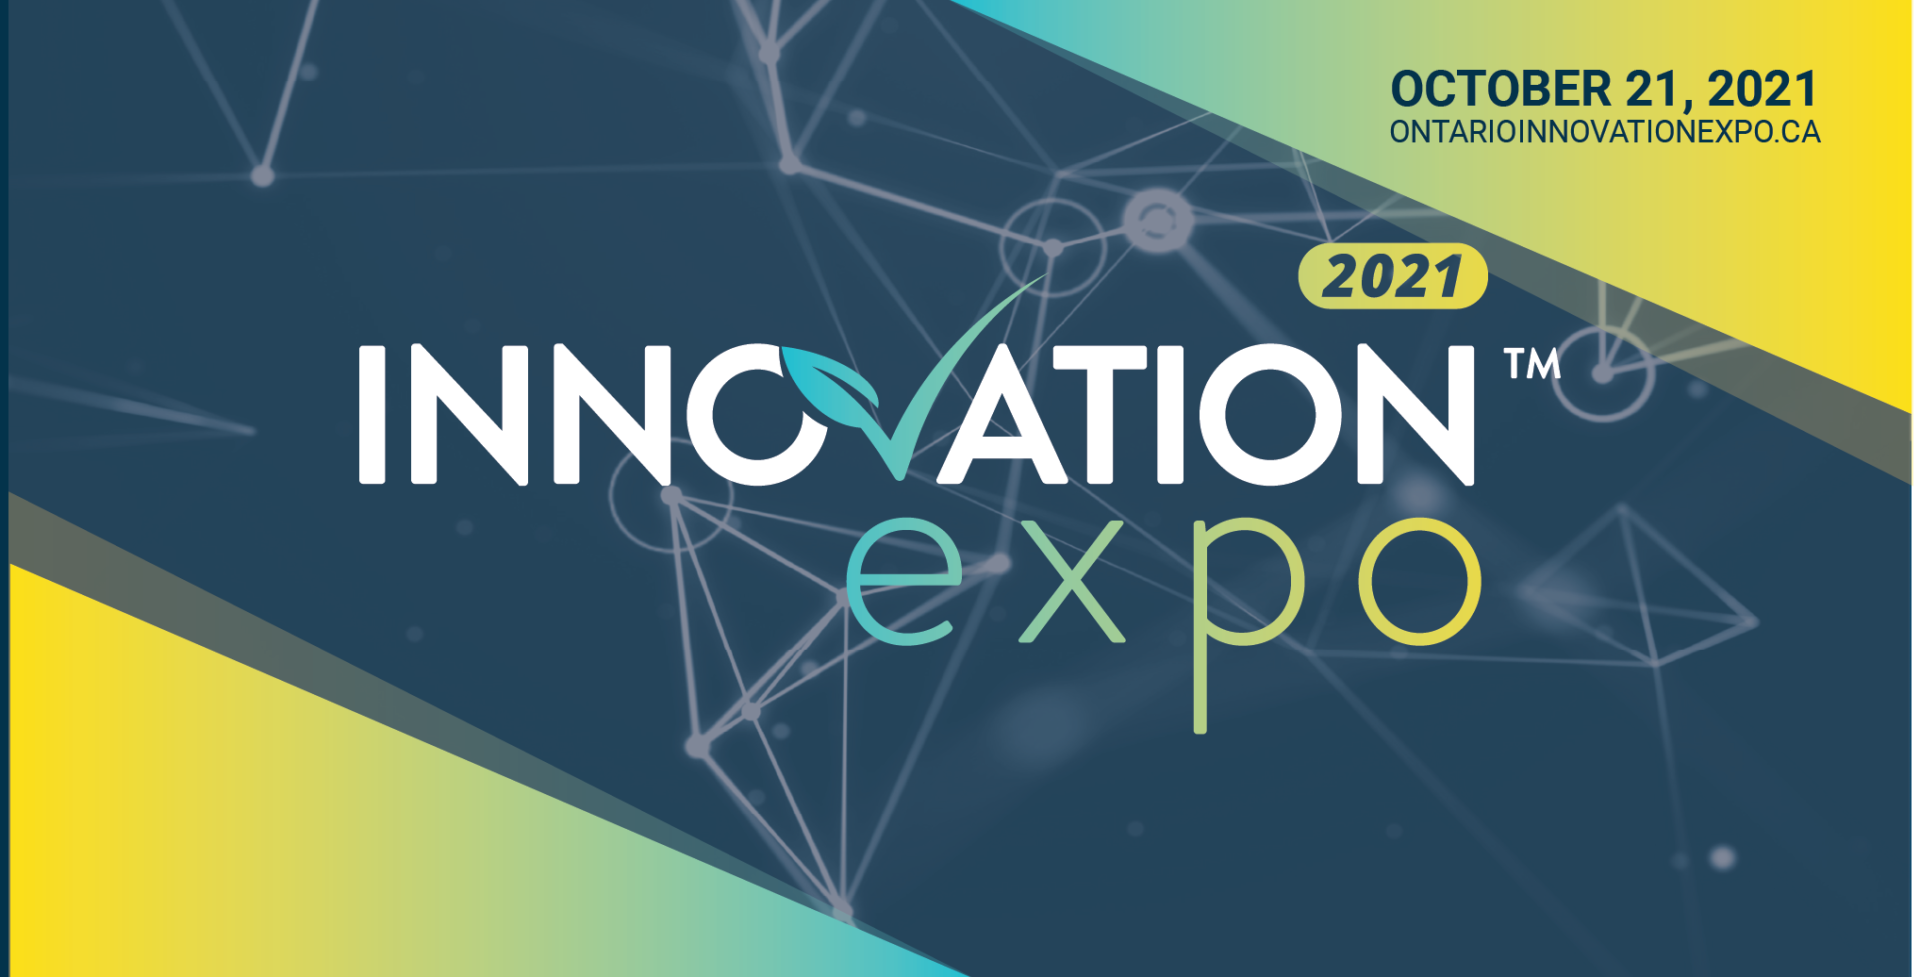 Announcing our 2021 Innovation Expo, Innovation Champion Sponsor